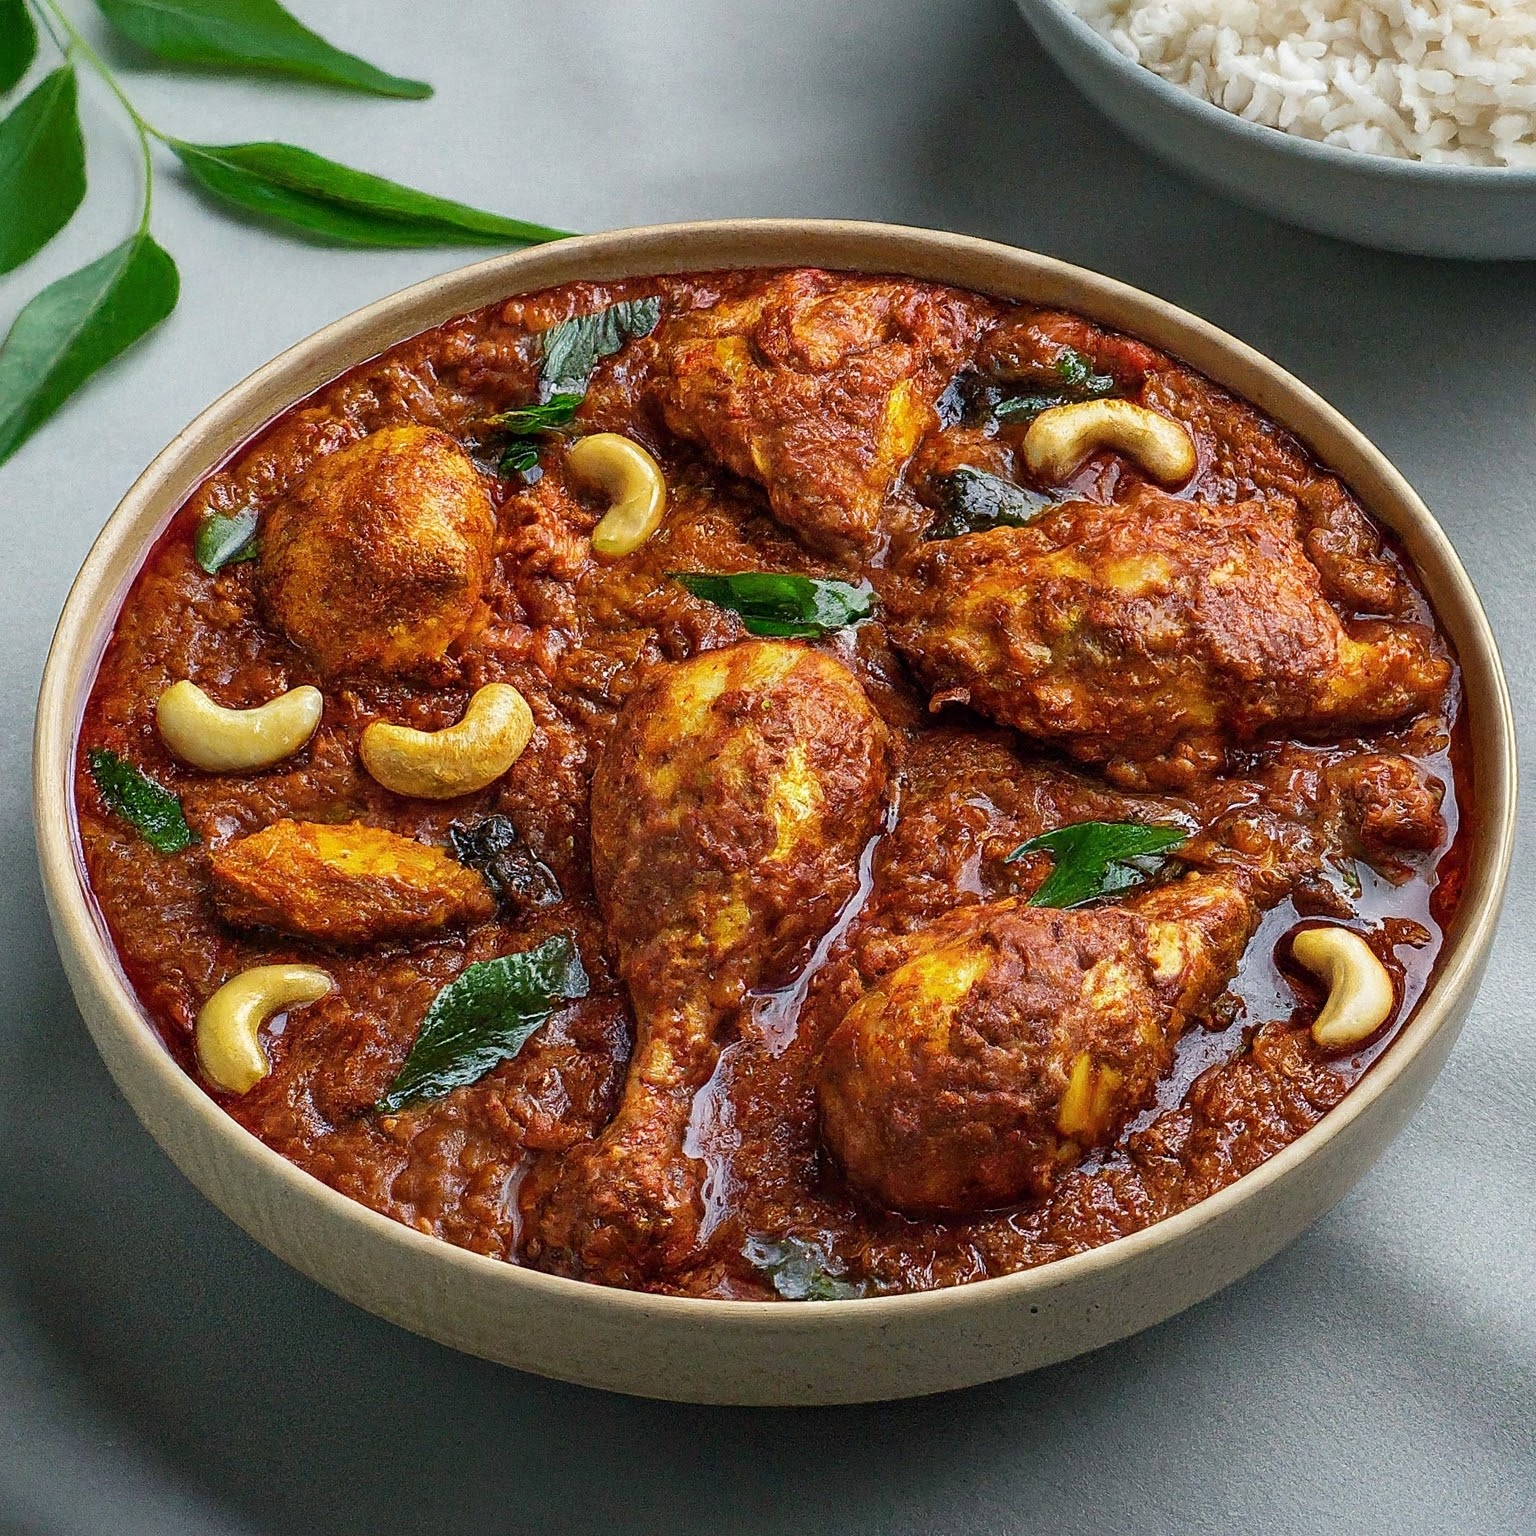 A delicious and flavorful Chettinad Chicken dish with tender chicken pieces in a deep red masala, served with rice.